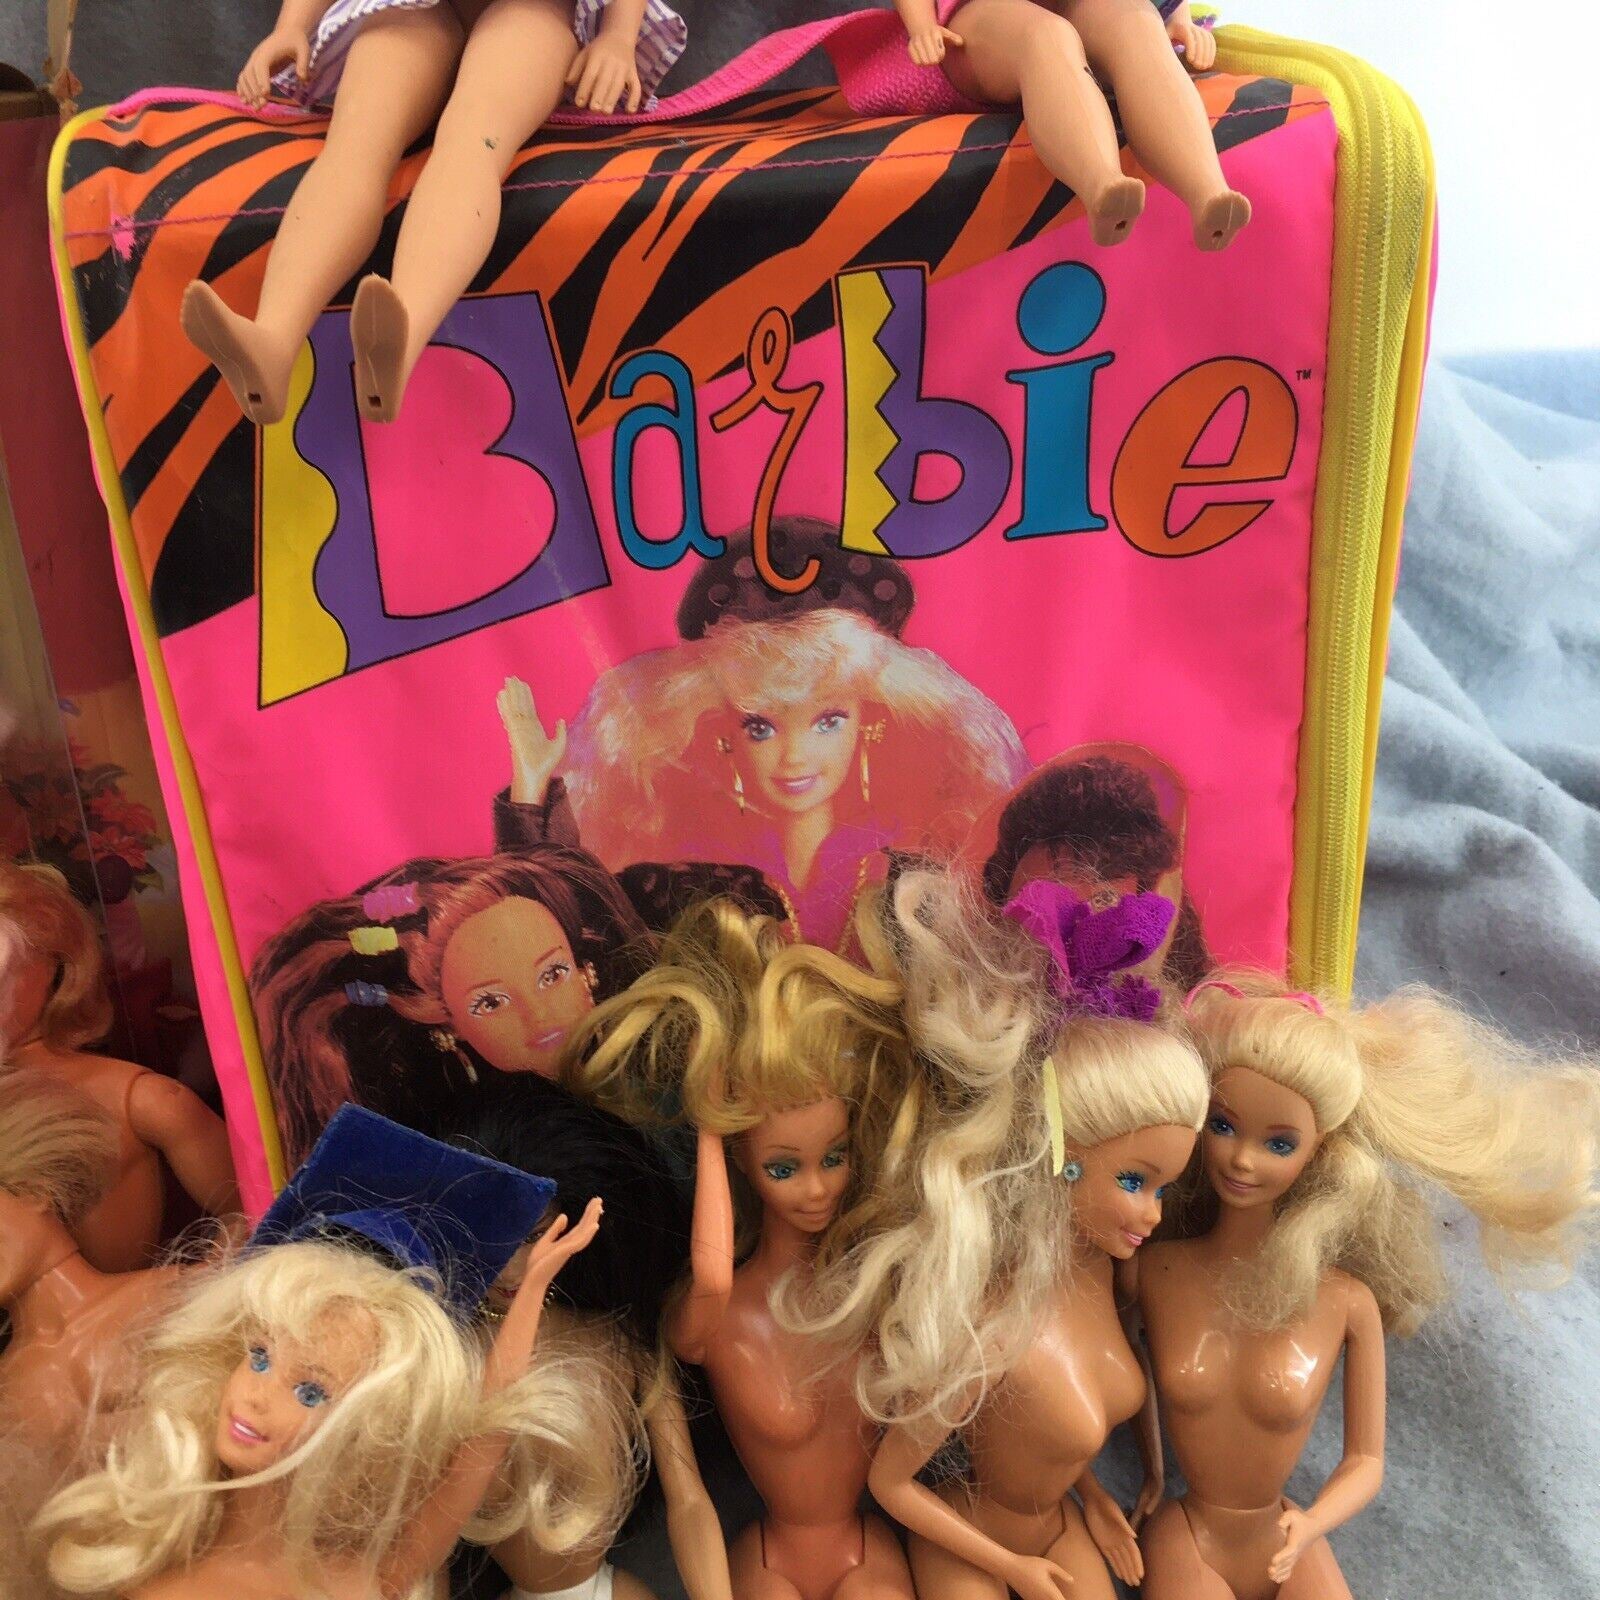 Barbie Clothing & Accessories